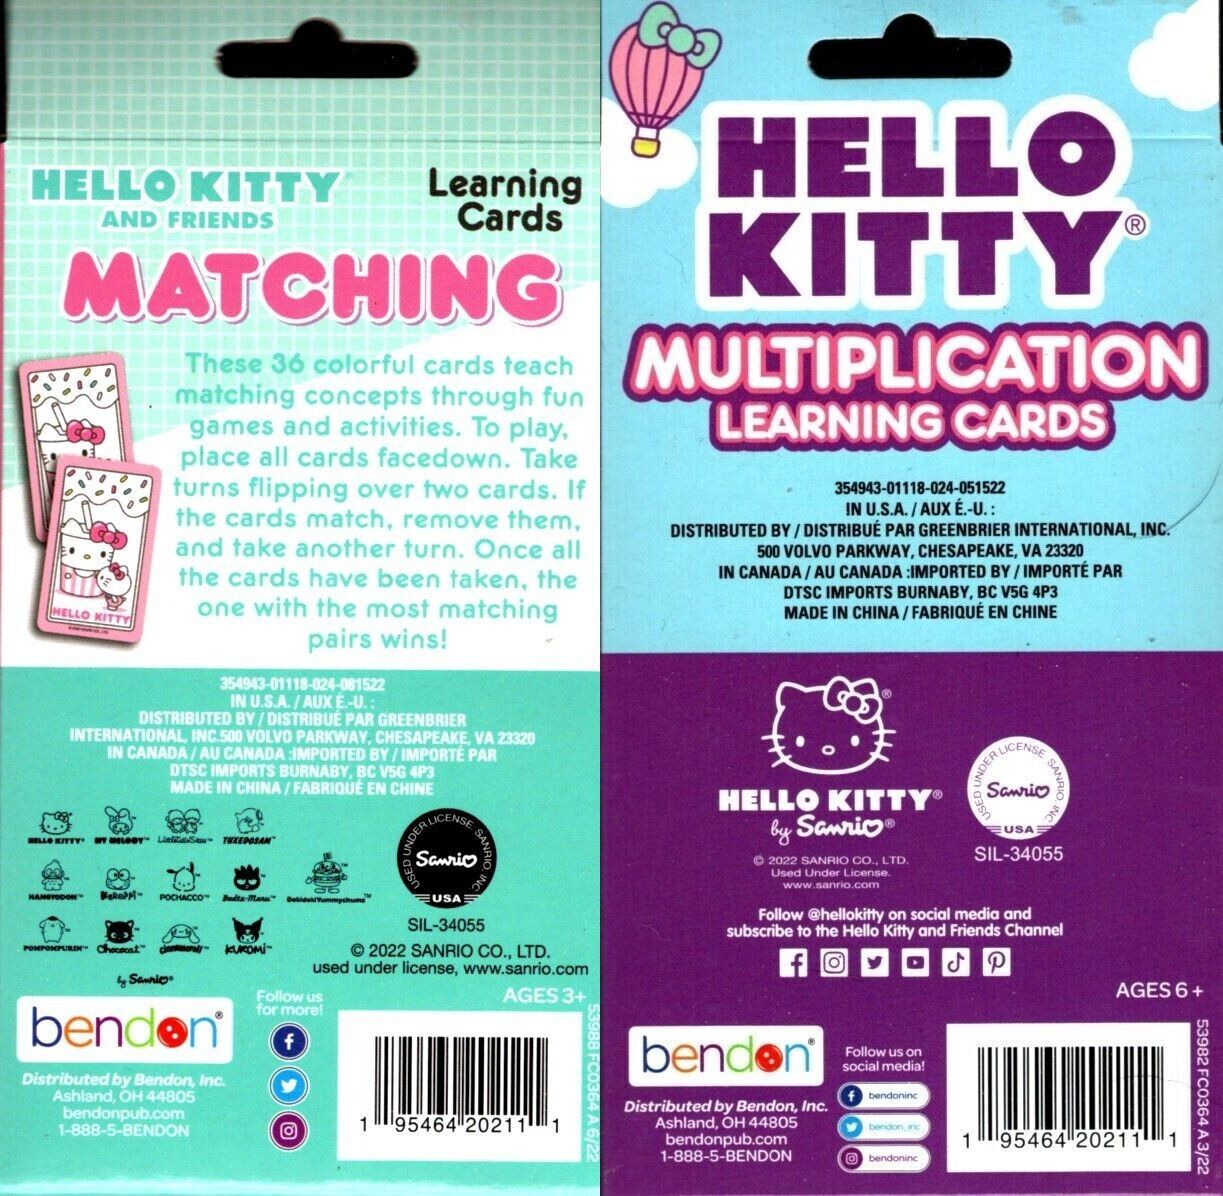 Hello Kitty and Friends - Matching & Multiplication - Learning 36 cards Set